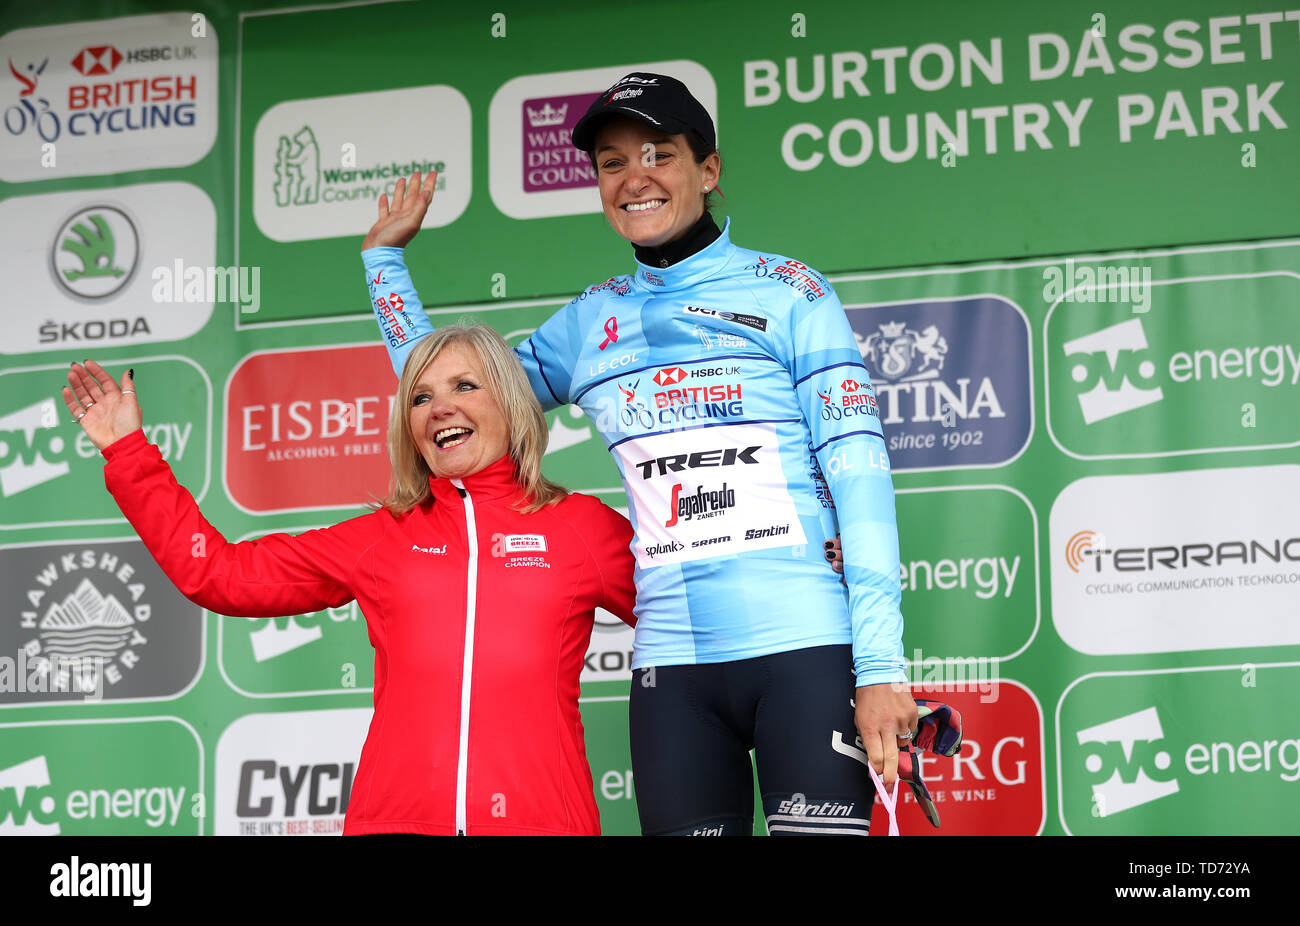 Trek Segafredo's Elizabeth Deignan (right) on the podium with the HSBC UK British Cycling Best British Rider jersey during stage four of the OVO Energy Women's Tour. Stock Photo